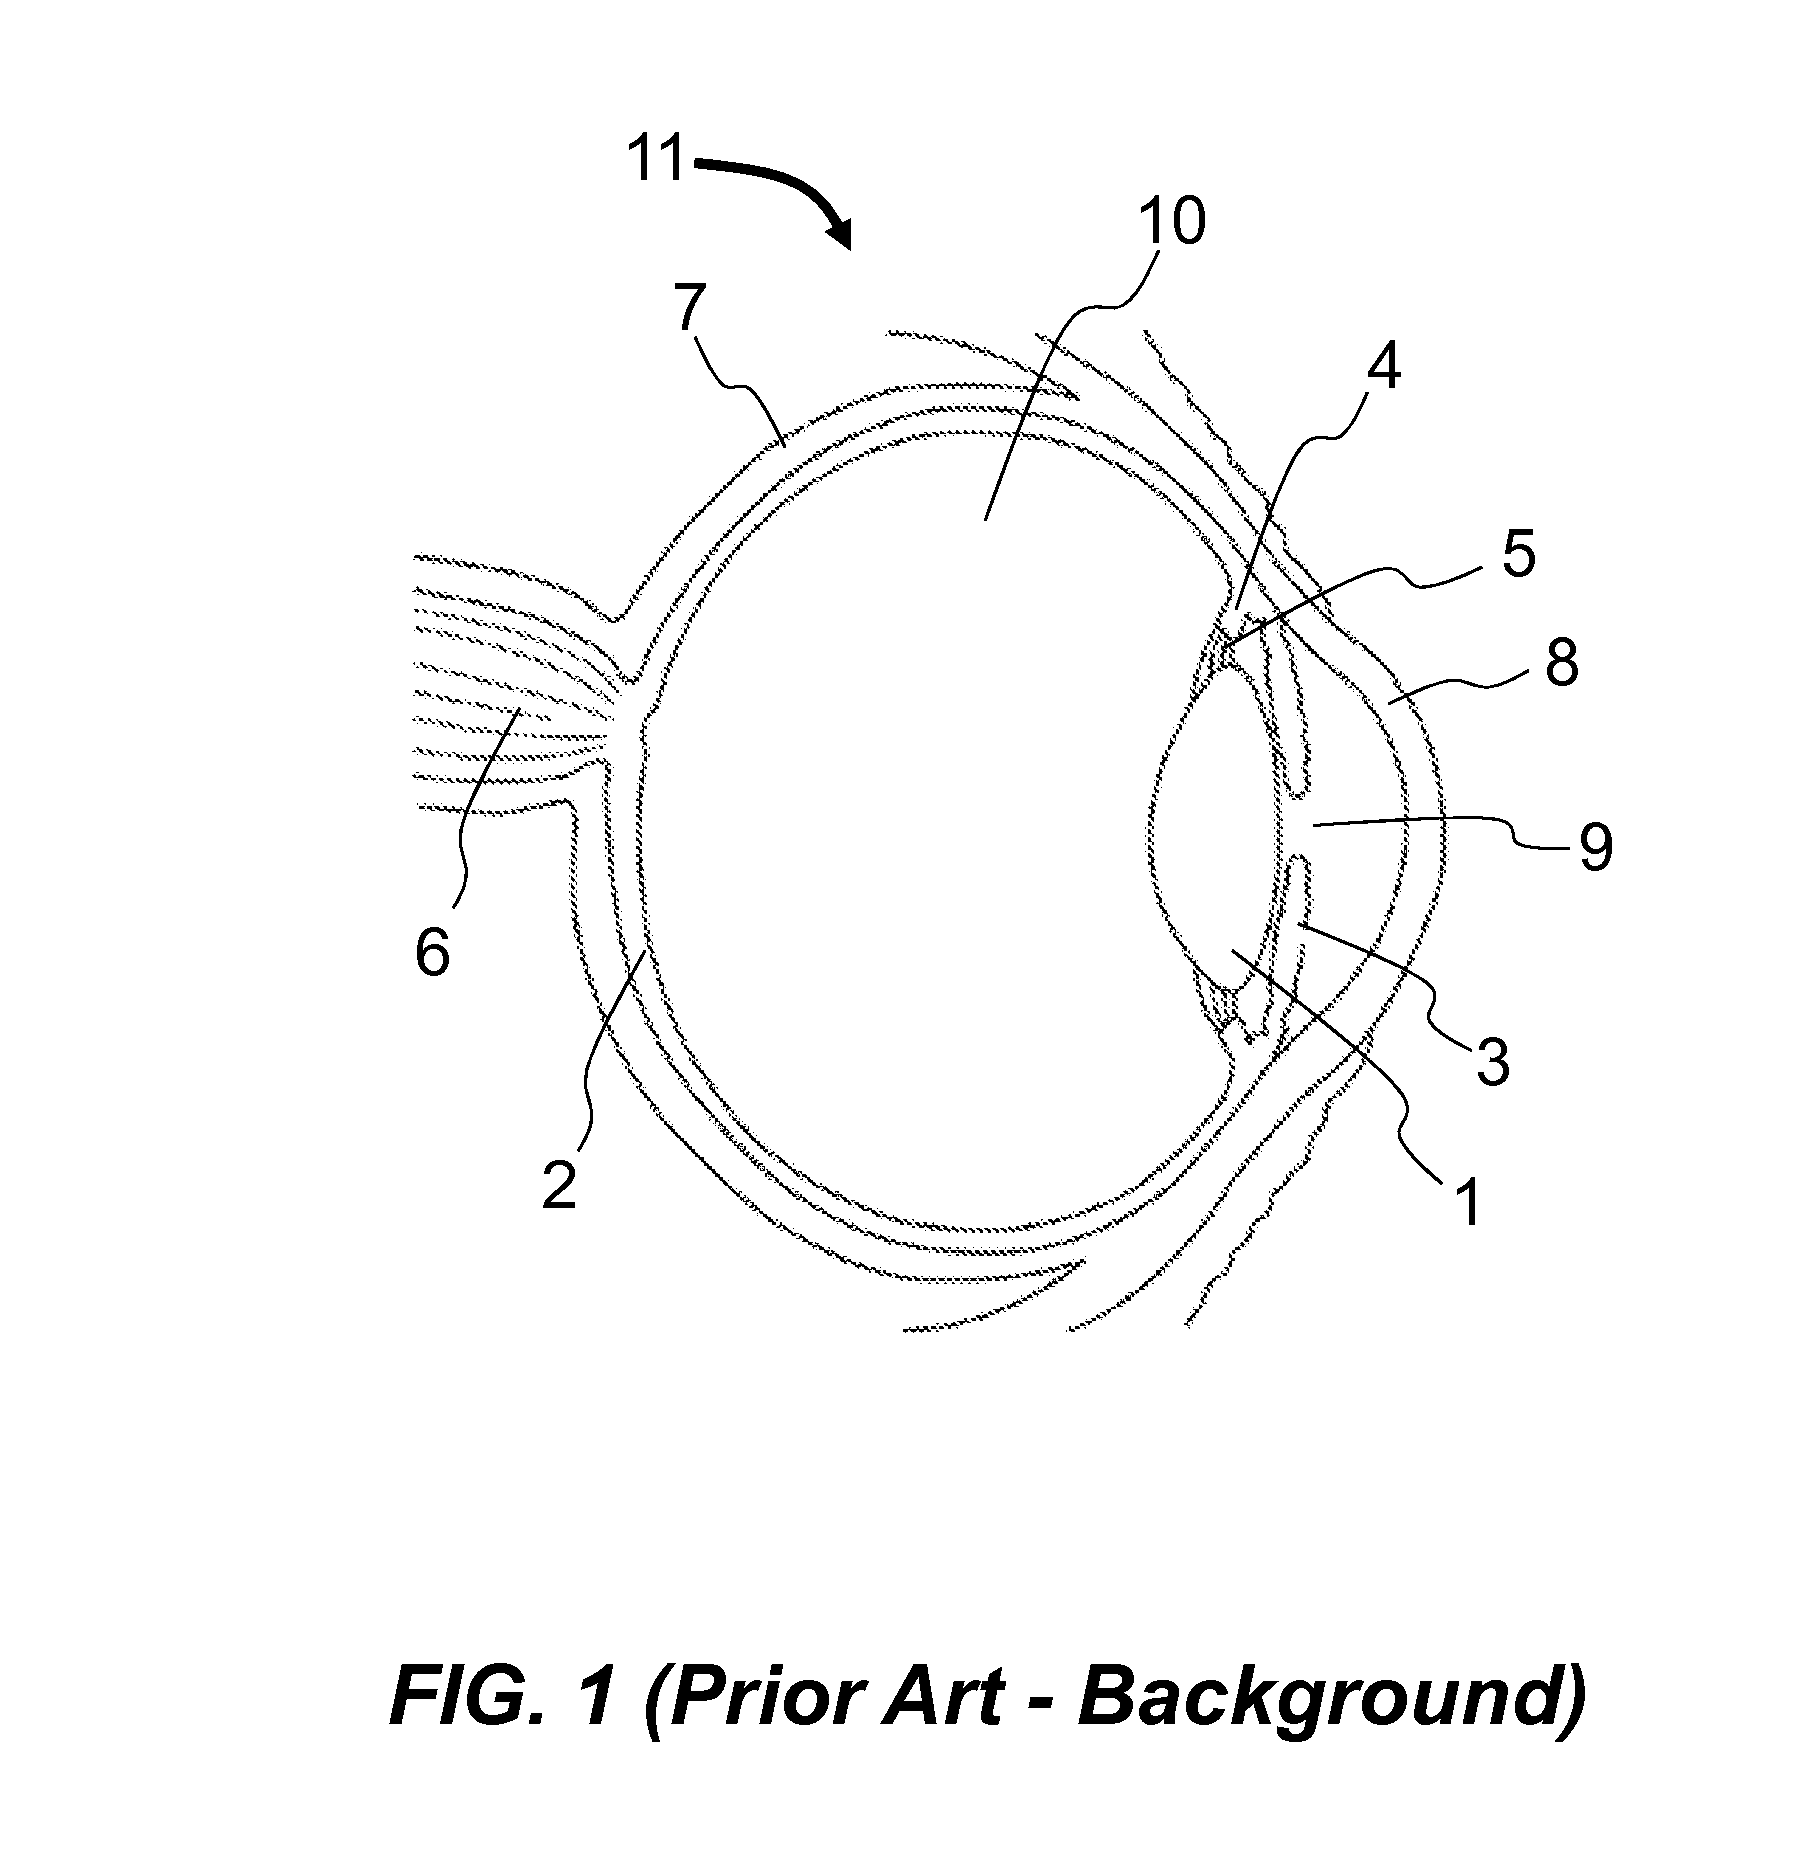 Method and apparatus to project image on retina at various focal depths utilizing flexible substrate containing optical array